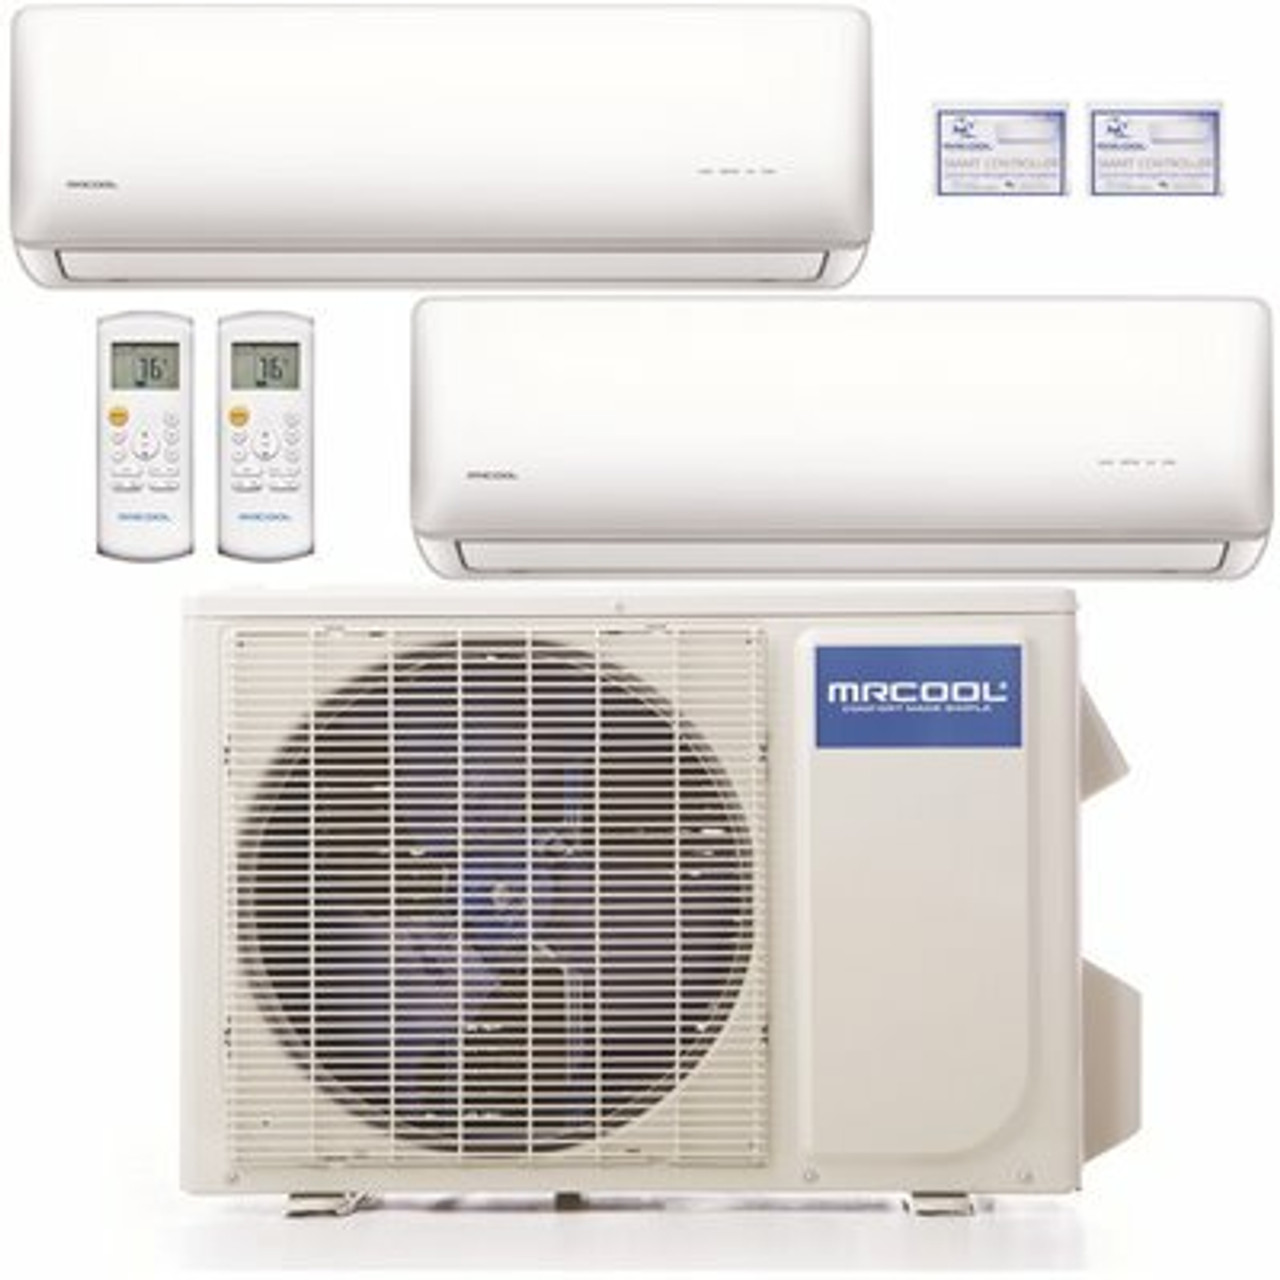 Mrcool Olympus 18,000 Btu 1.5 Ton 2-Zone Ductless Mini Split Air Conditioner And Heat Pump, 25 Ft. Install Kit - 230V/60Hz